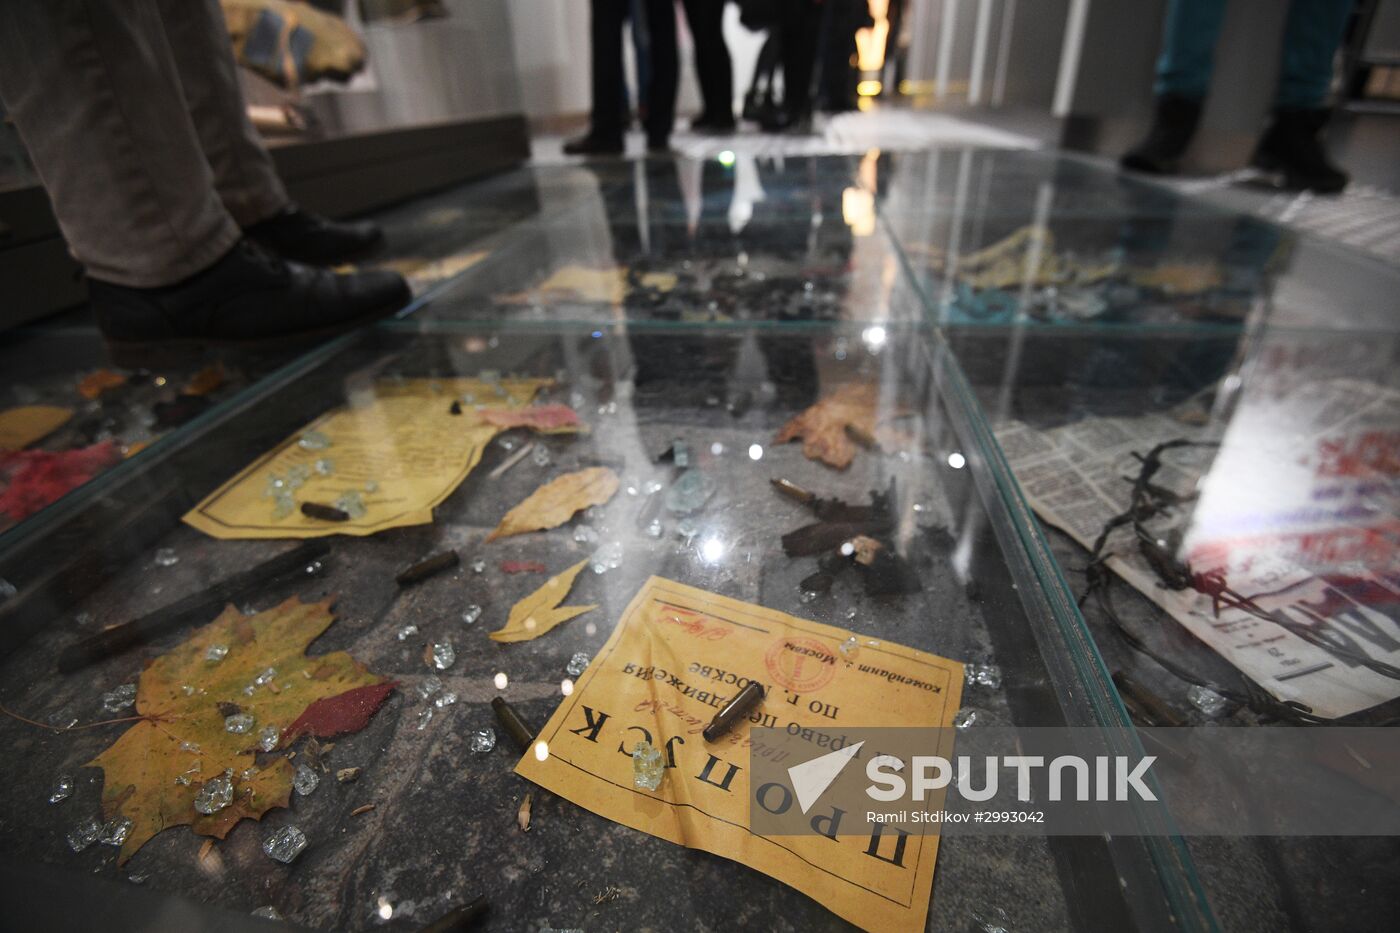 Exhibition "Russia 21st Century: Challenges and Priorities"